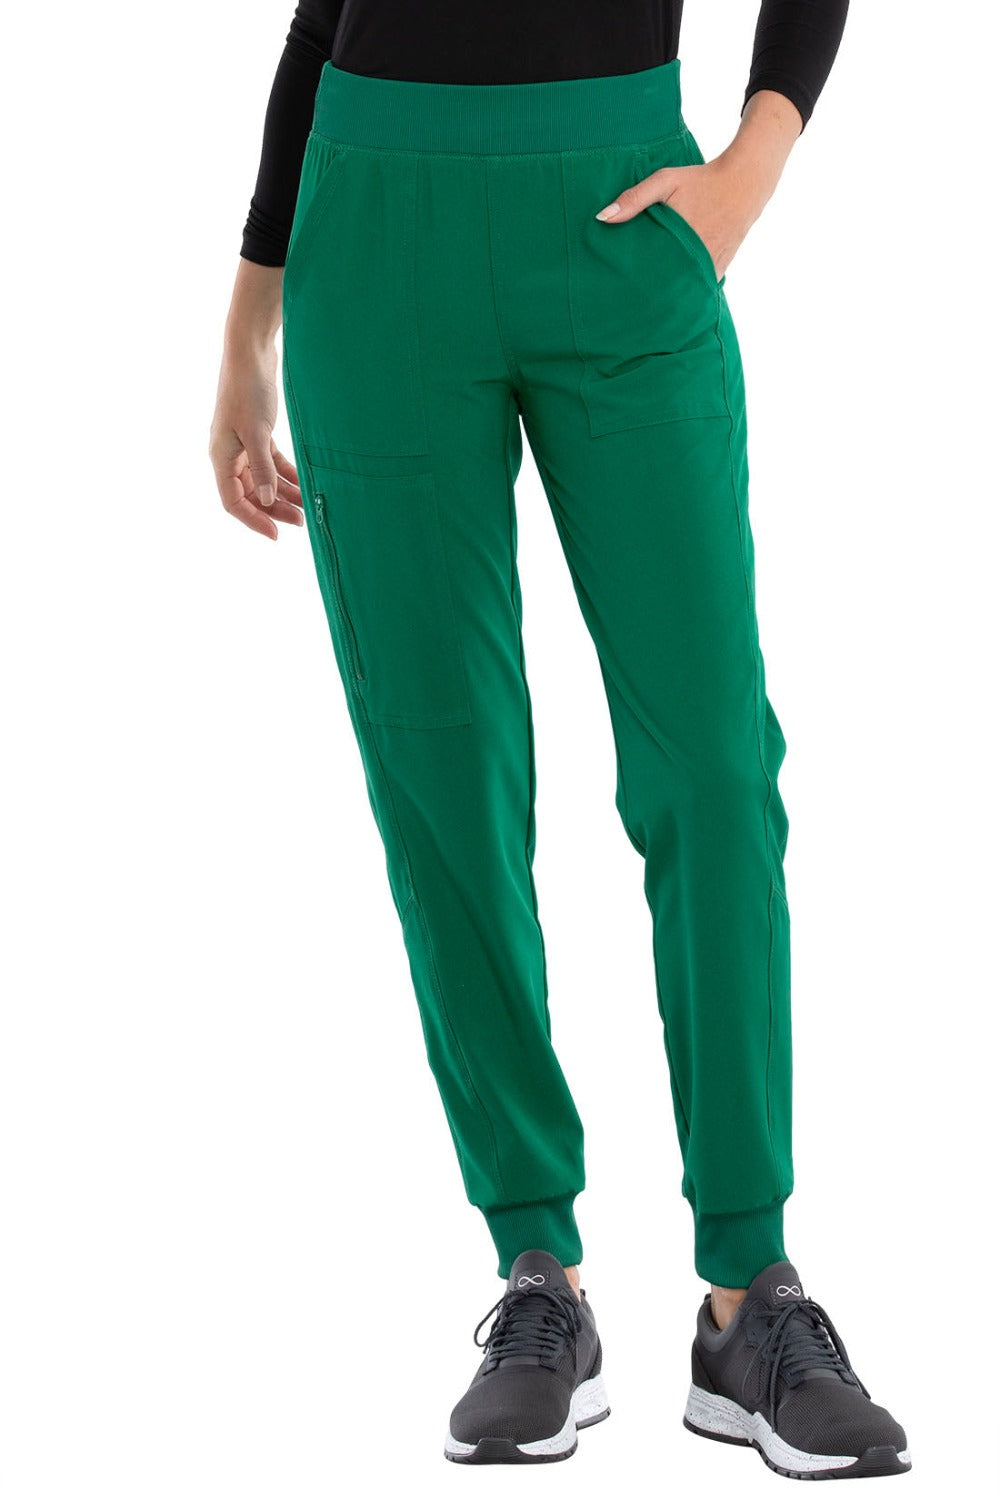 Cherokee Allura Petite Scrub Pant Pull On Jogger in Hunter at Parker's Clothing and Shoes.